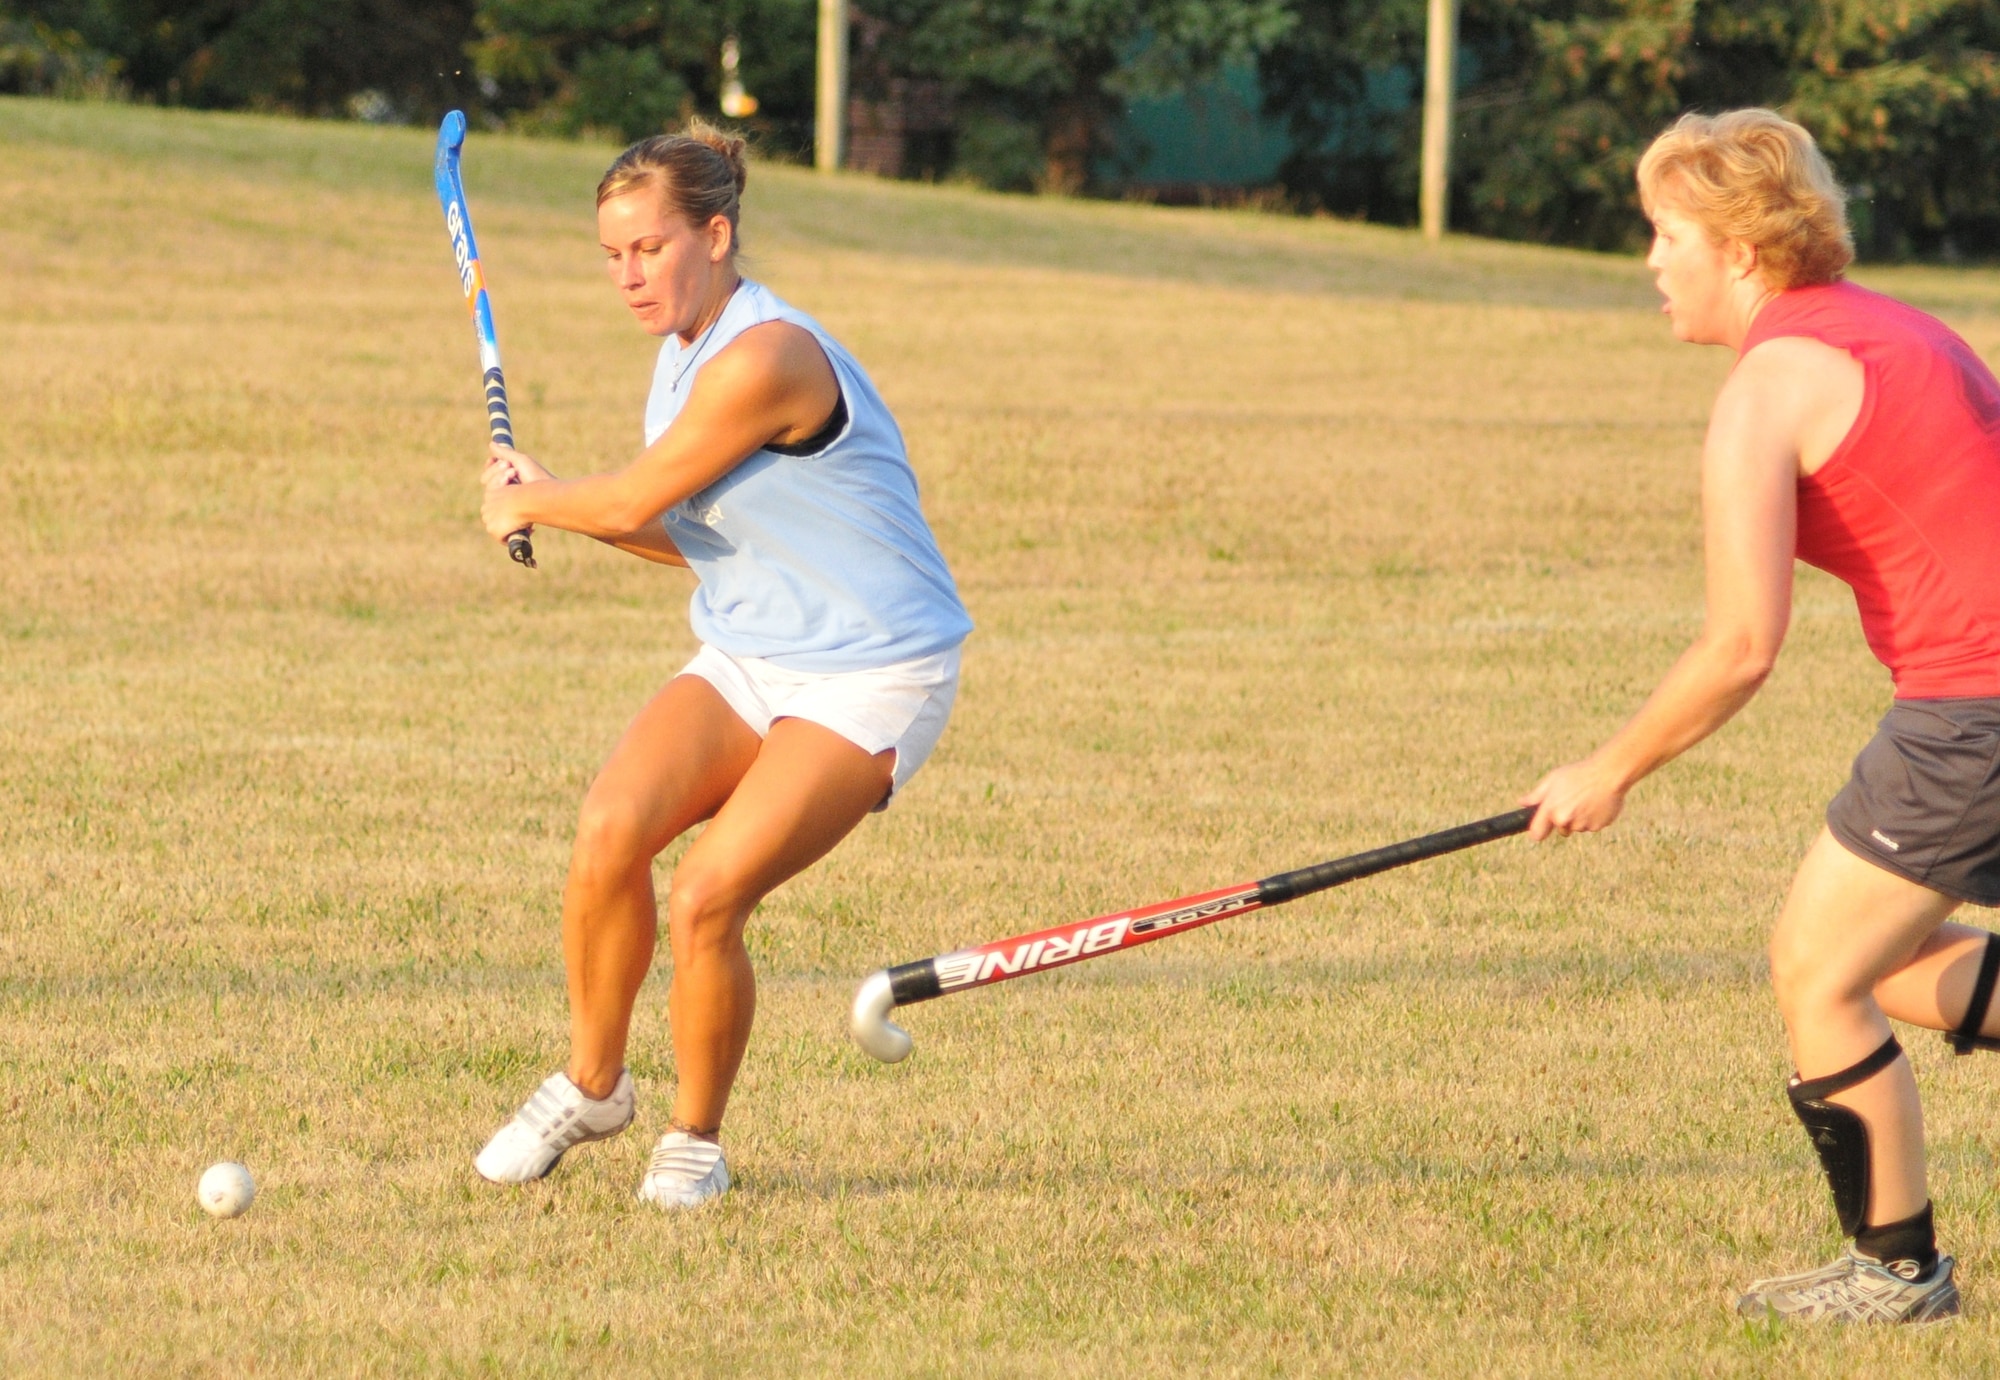 Kate Blanchfield drives a ball toward the goal during her team's July 22, 2012, win in a Dover, Del., adult field hockey league. The 512th Airlift Wing technical sergeant  has played the sport for 15 years. (U.S. Air Force photo by Chief Master Sgt. Matt Proietti)